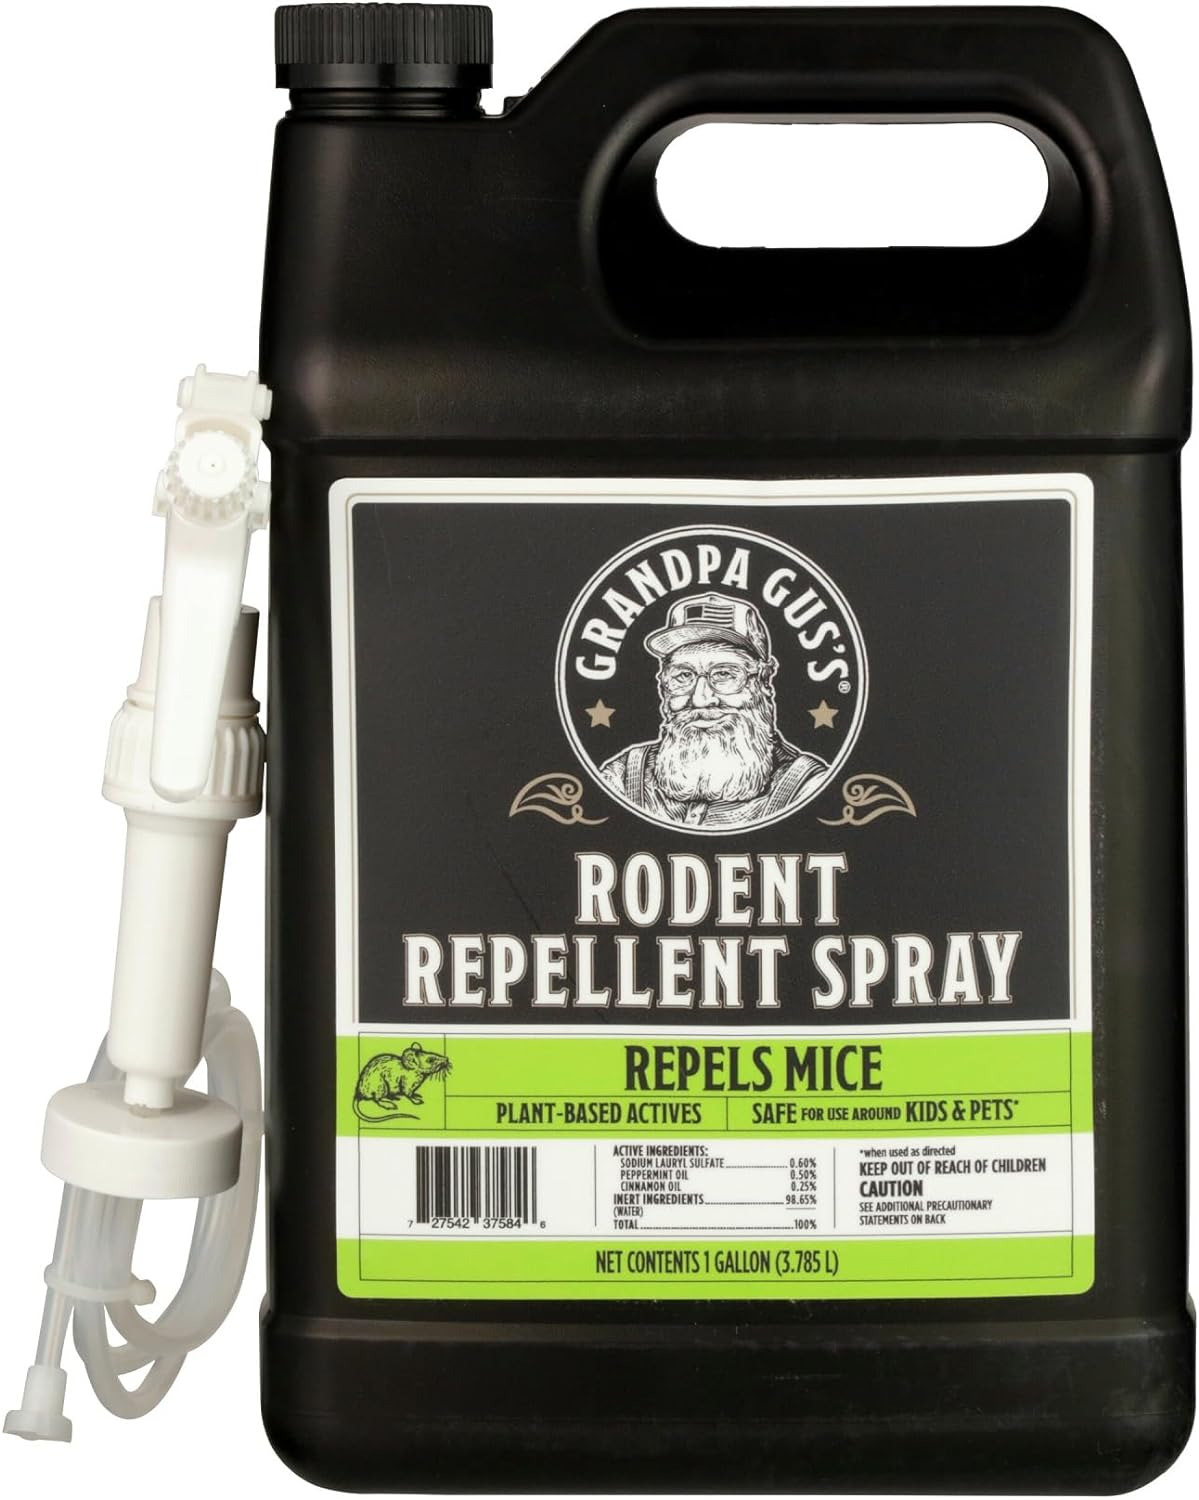 Rodent Repellent Spray with Sprayer, Natural Peppermint & Cinnamon Oils Repel Mi